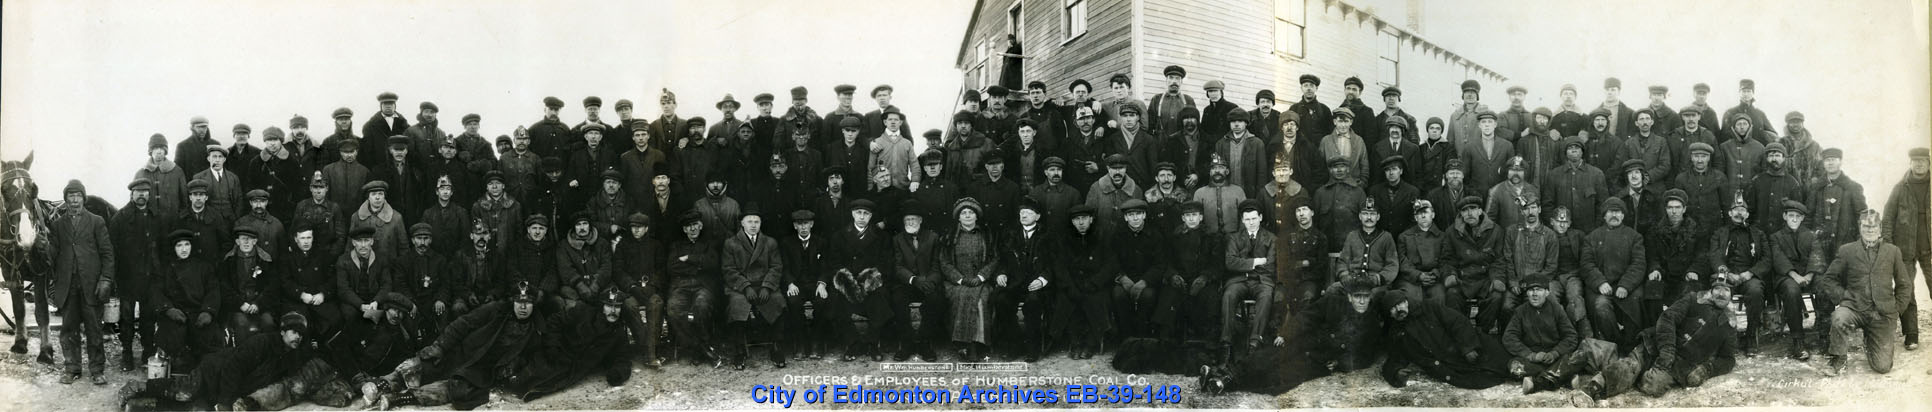 Officers and Employees of Humberstone Coal Co., 1917 [EB-39-148]